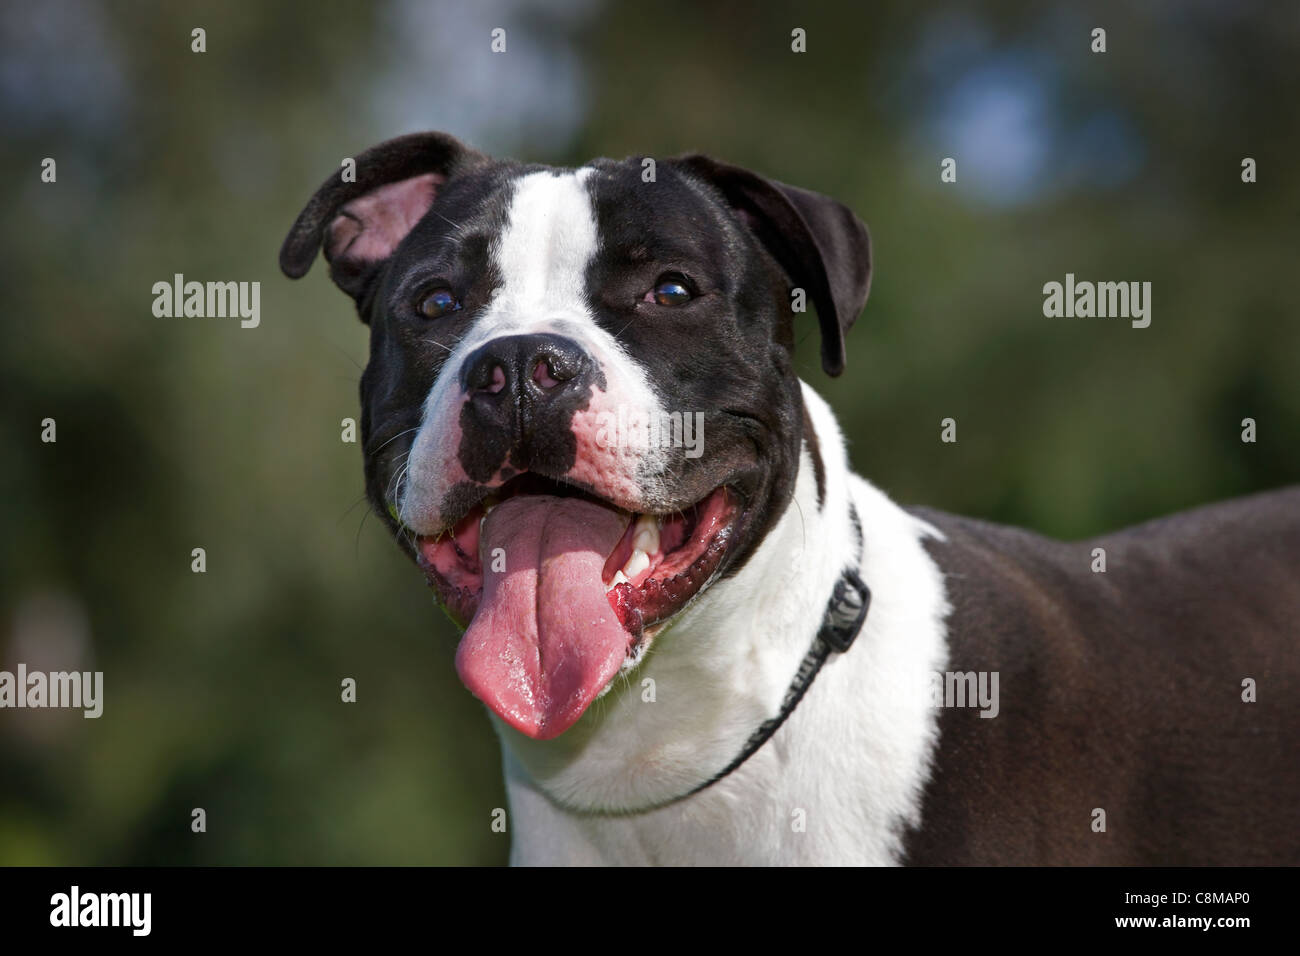 American Staffordshire terrier (Canis lupus familiaris) panting in garden Stock Photo